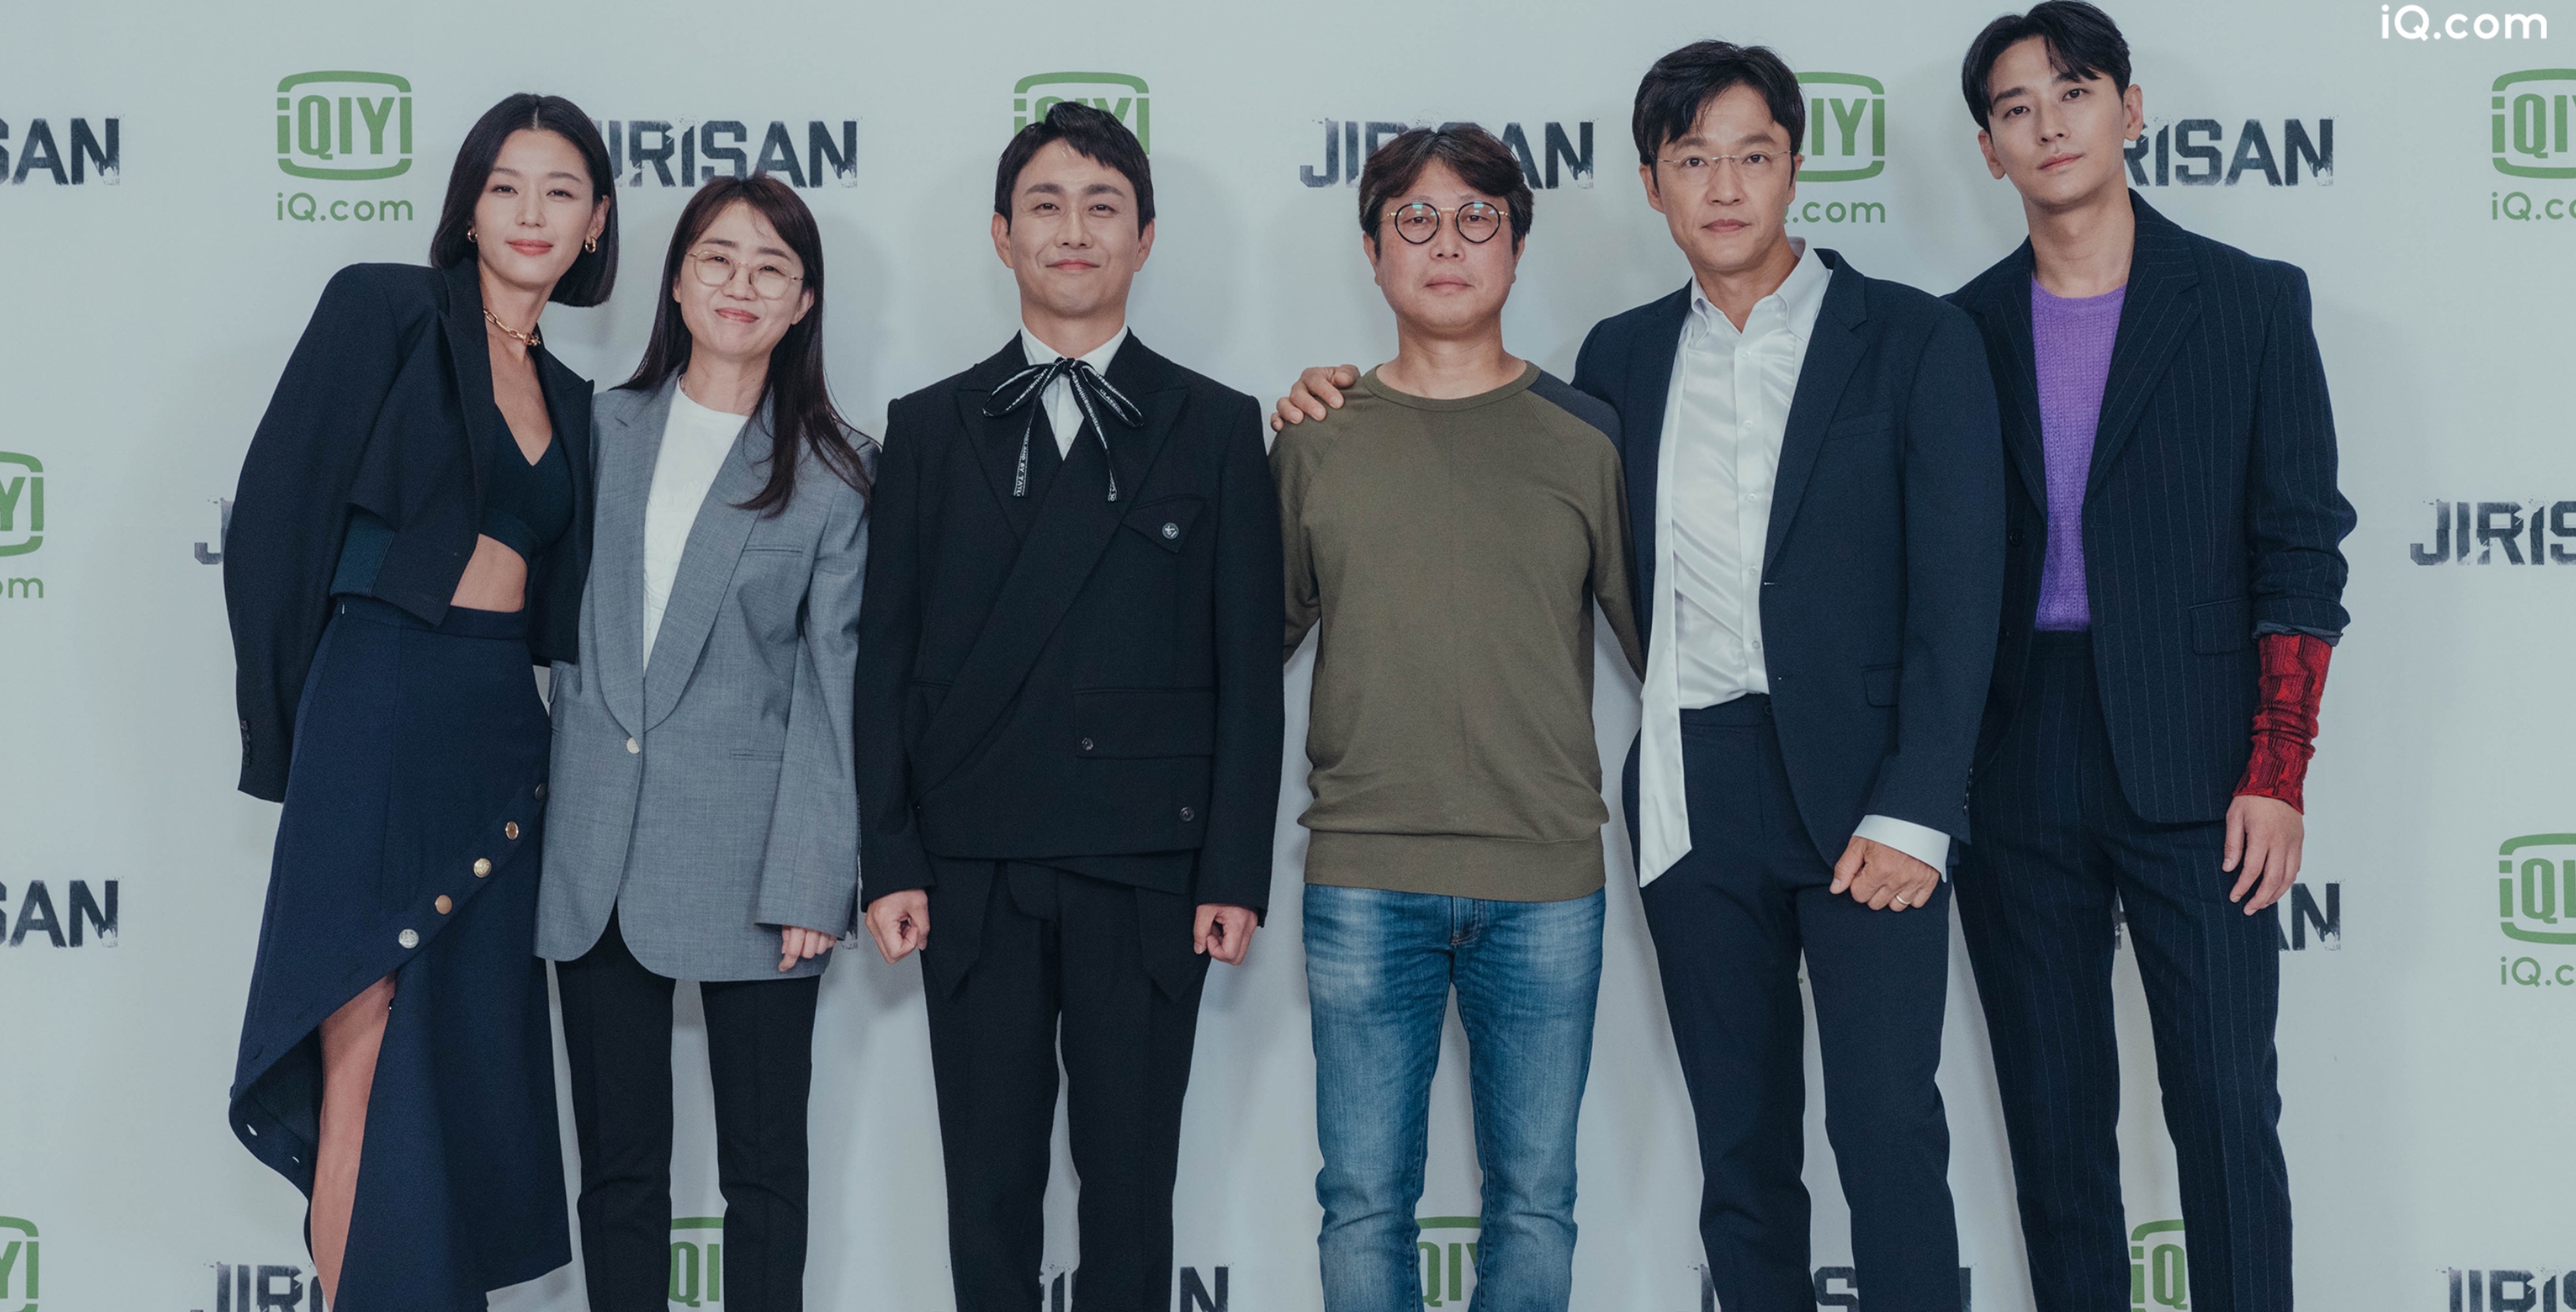 Main cast, writer and director for iQiyi and tvN 'Jirisan' K-drama at photo op for press event